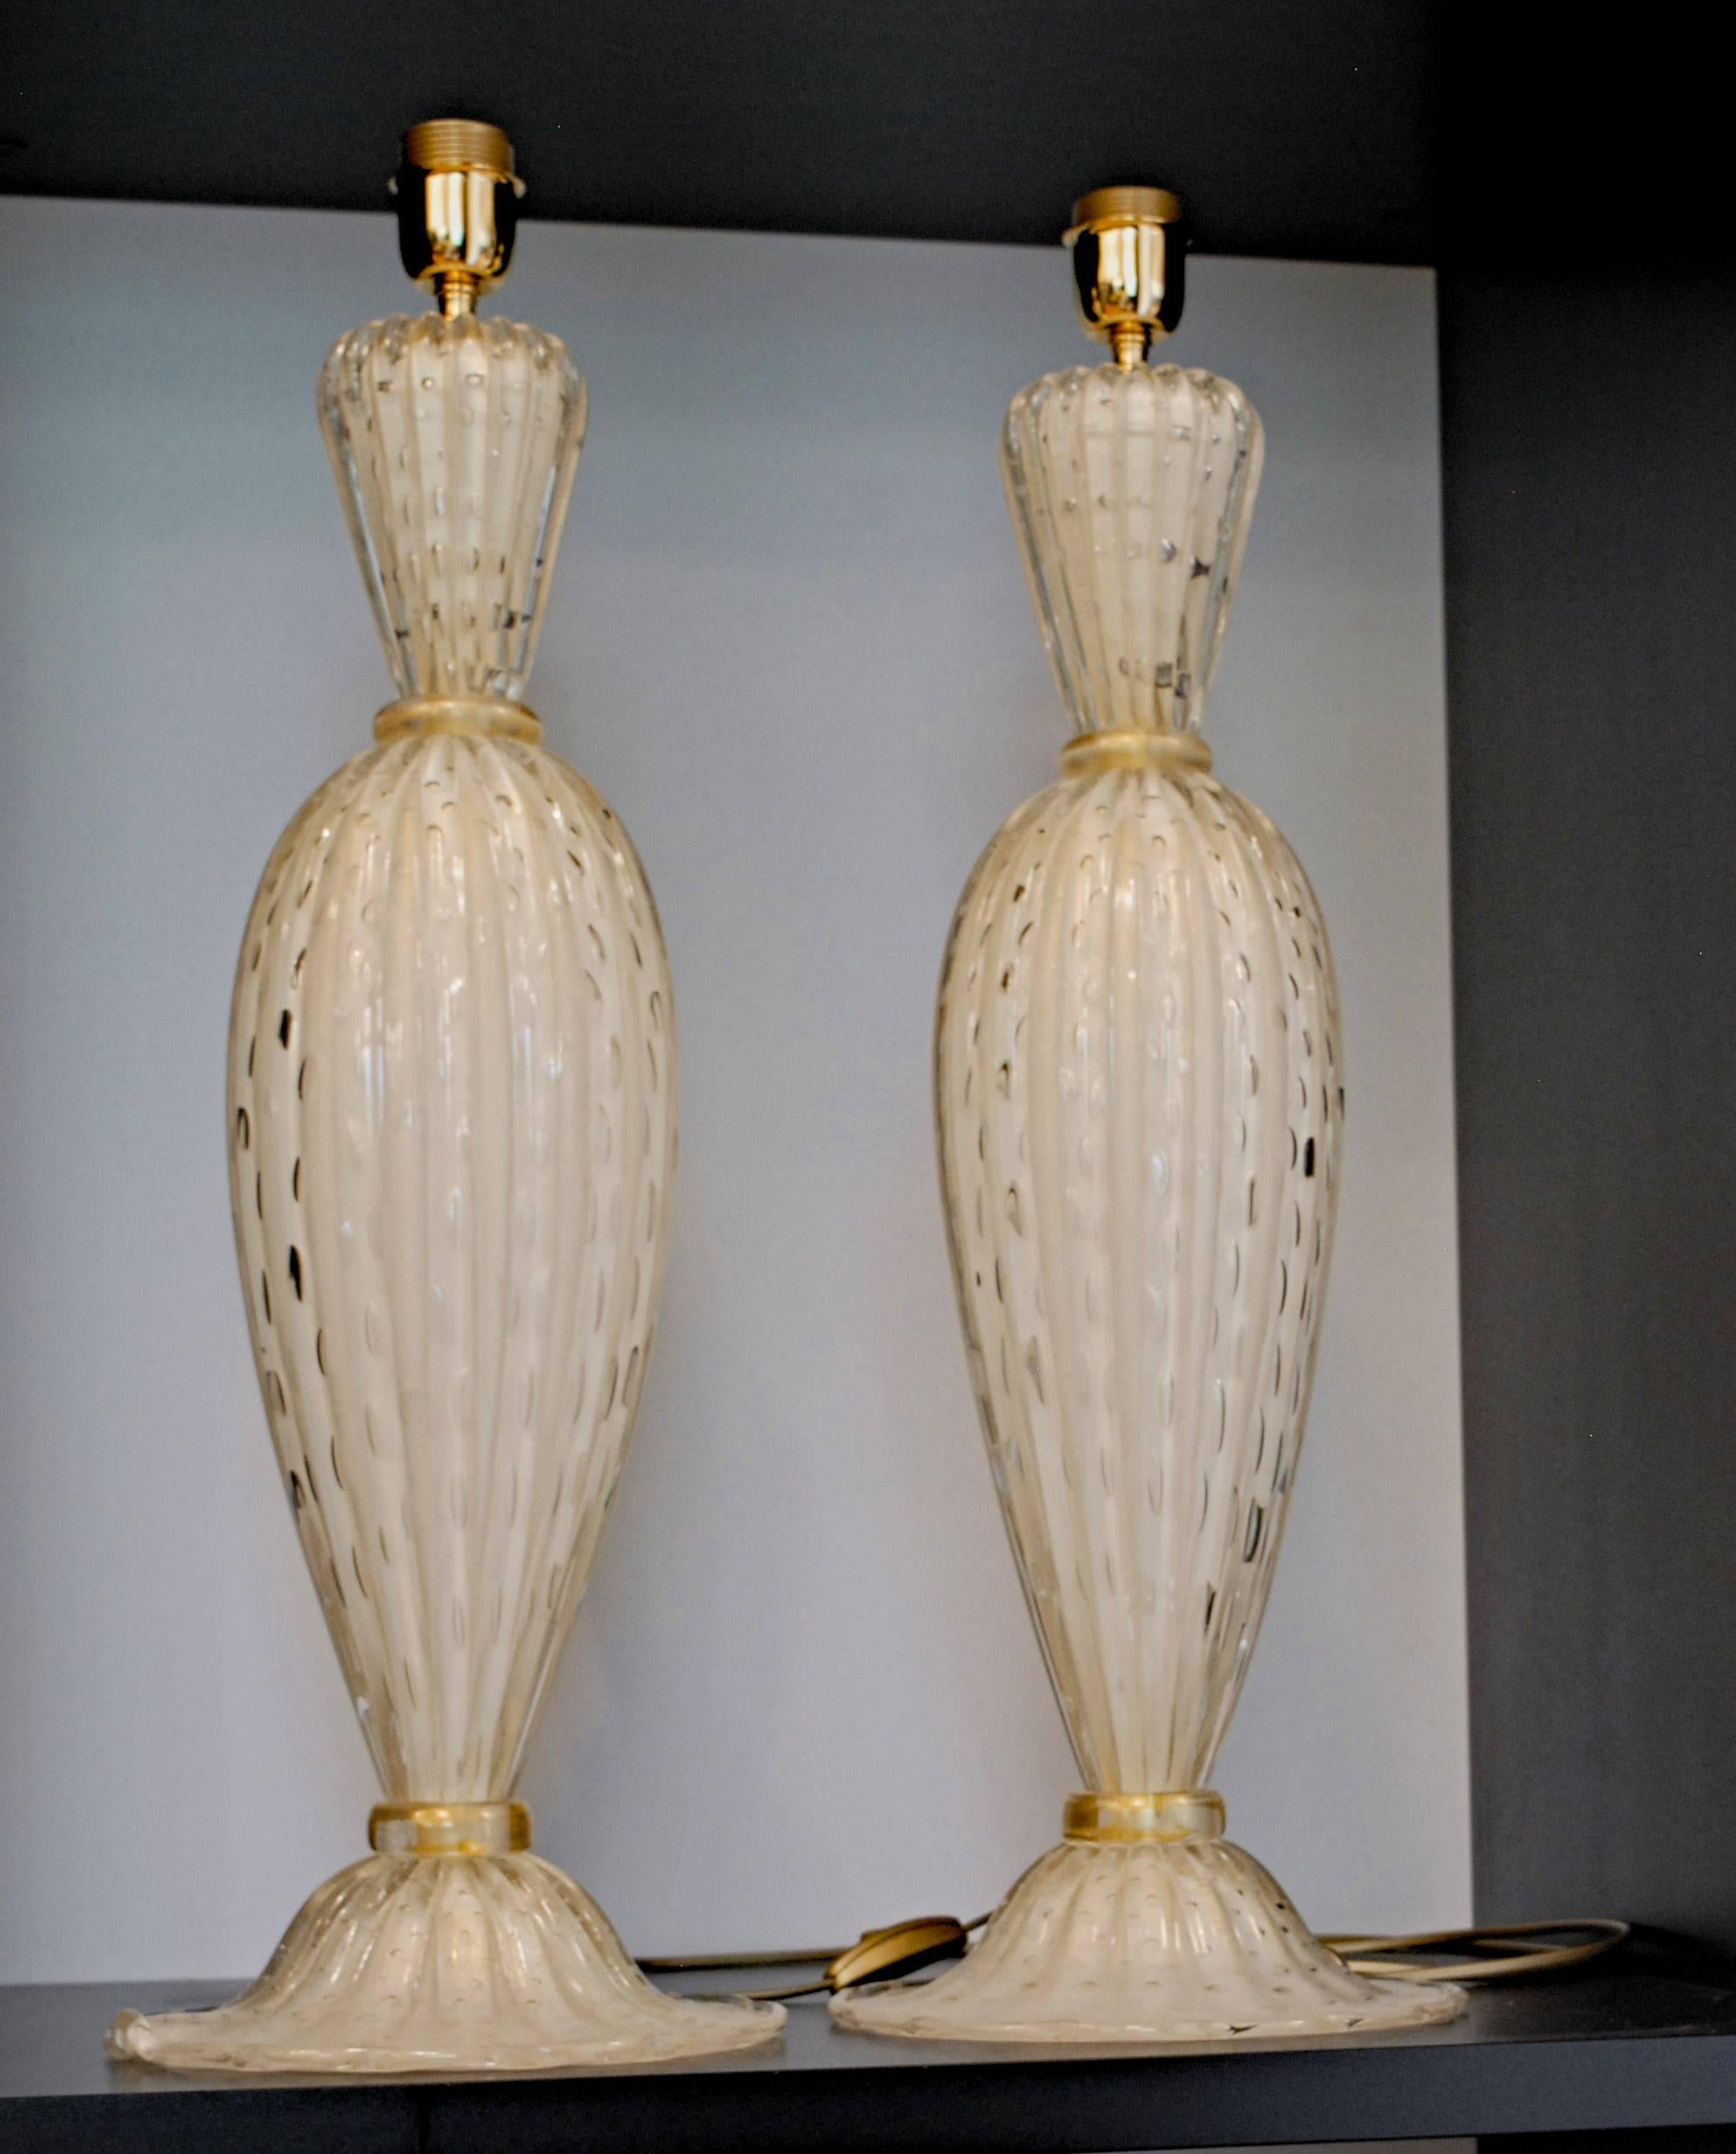 Italian Alberto Dona Pair of White Ivory Table Lamps, Rigadin Balloton with Gold Leaf